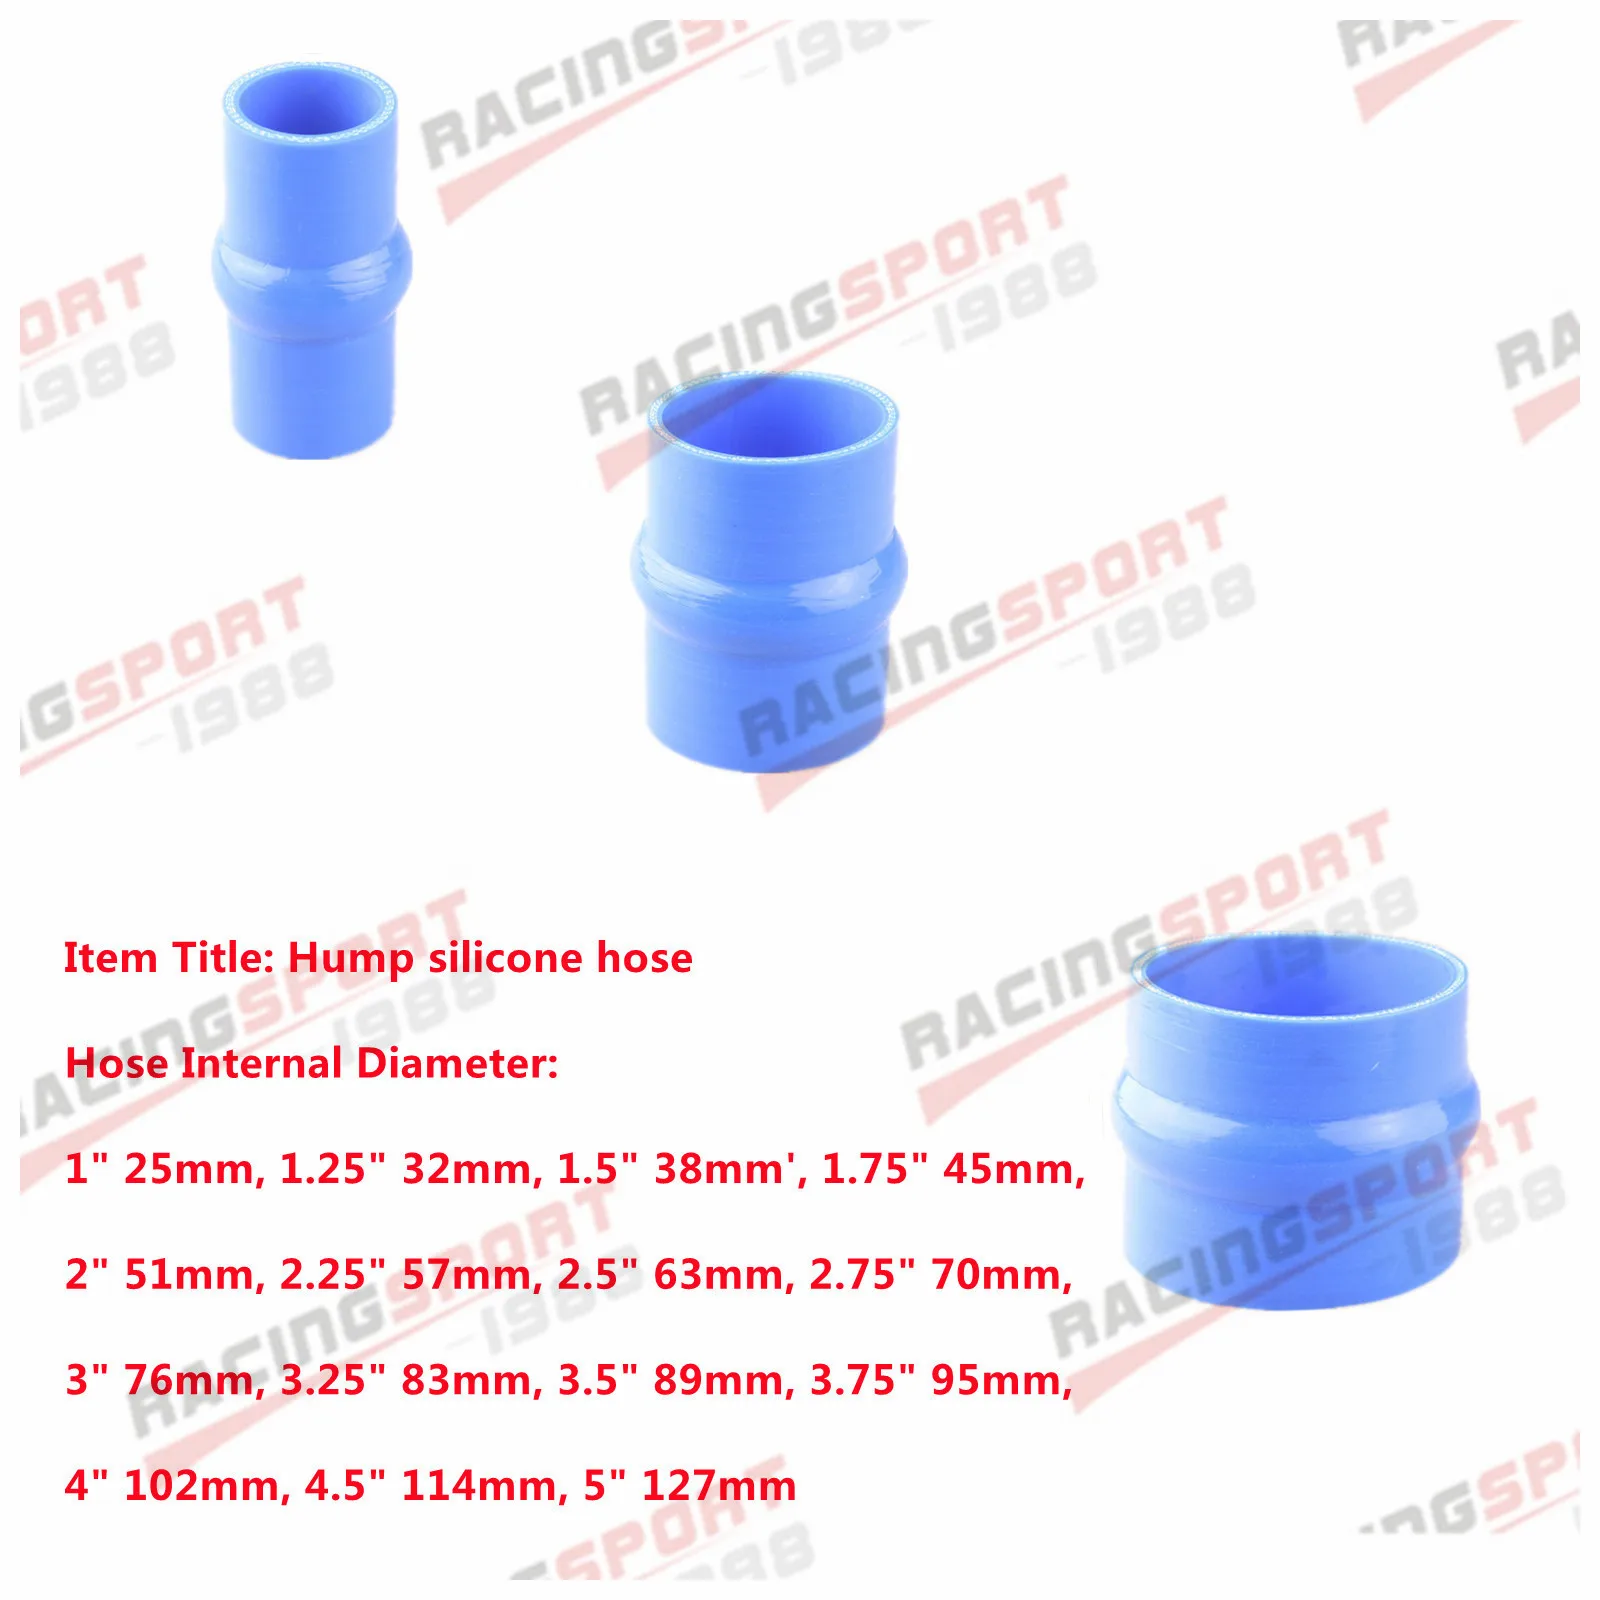 

1" 1.5" 2" 2.5" 3" 3.5" 4" Hump Straight Turbo Silicone Hose Connector Joiner Intercooler Pipe Blue